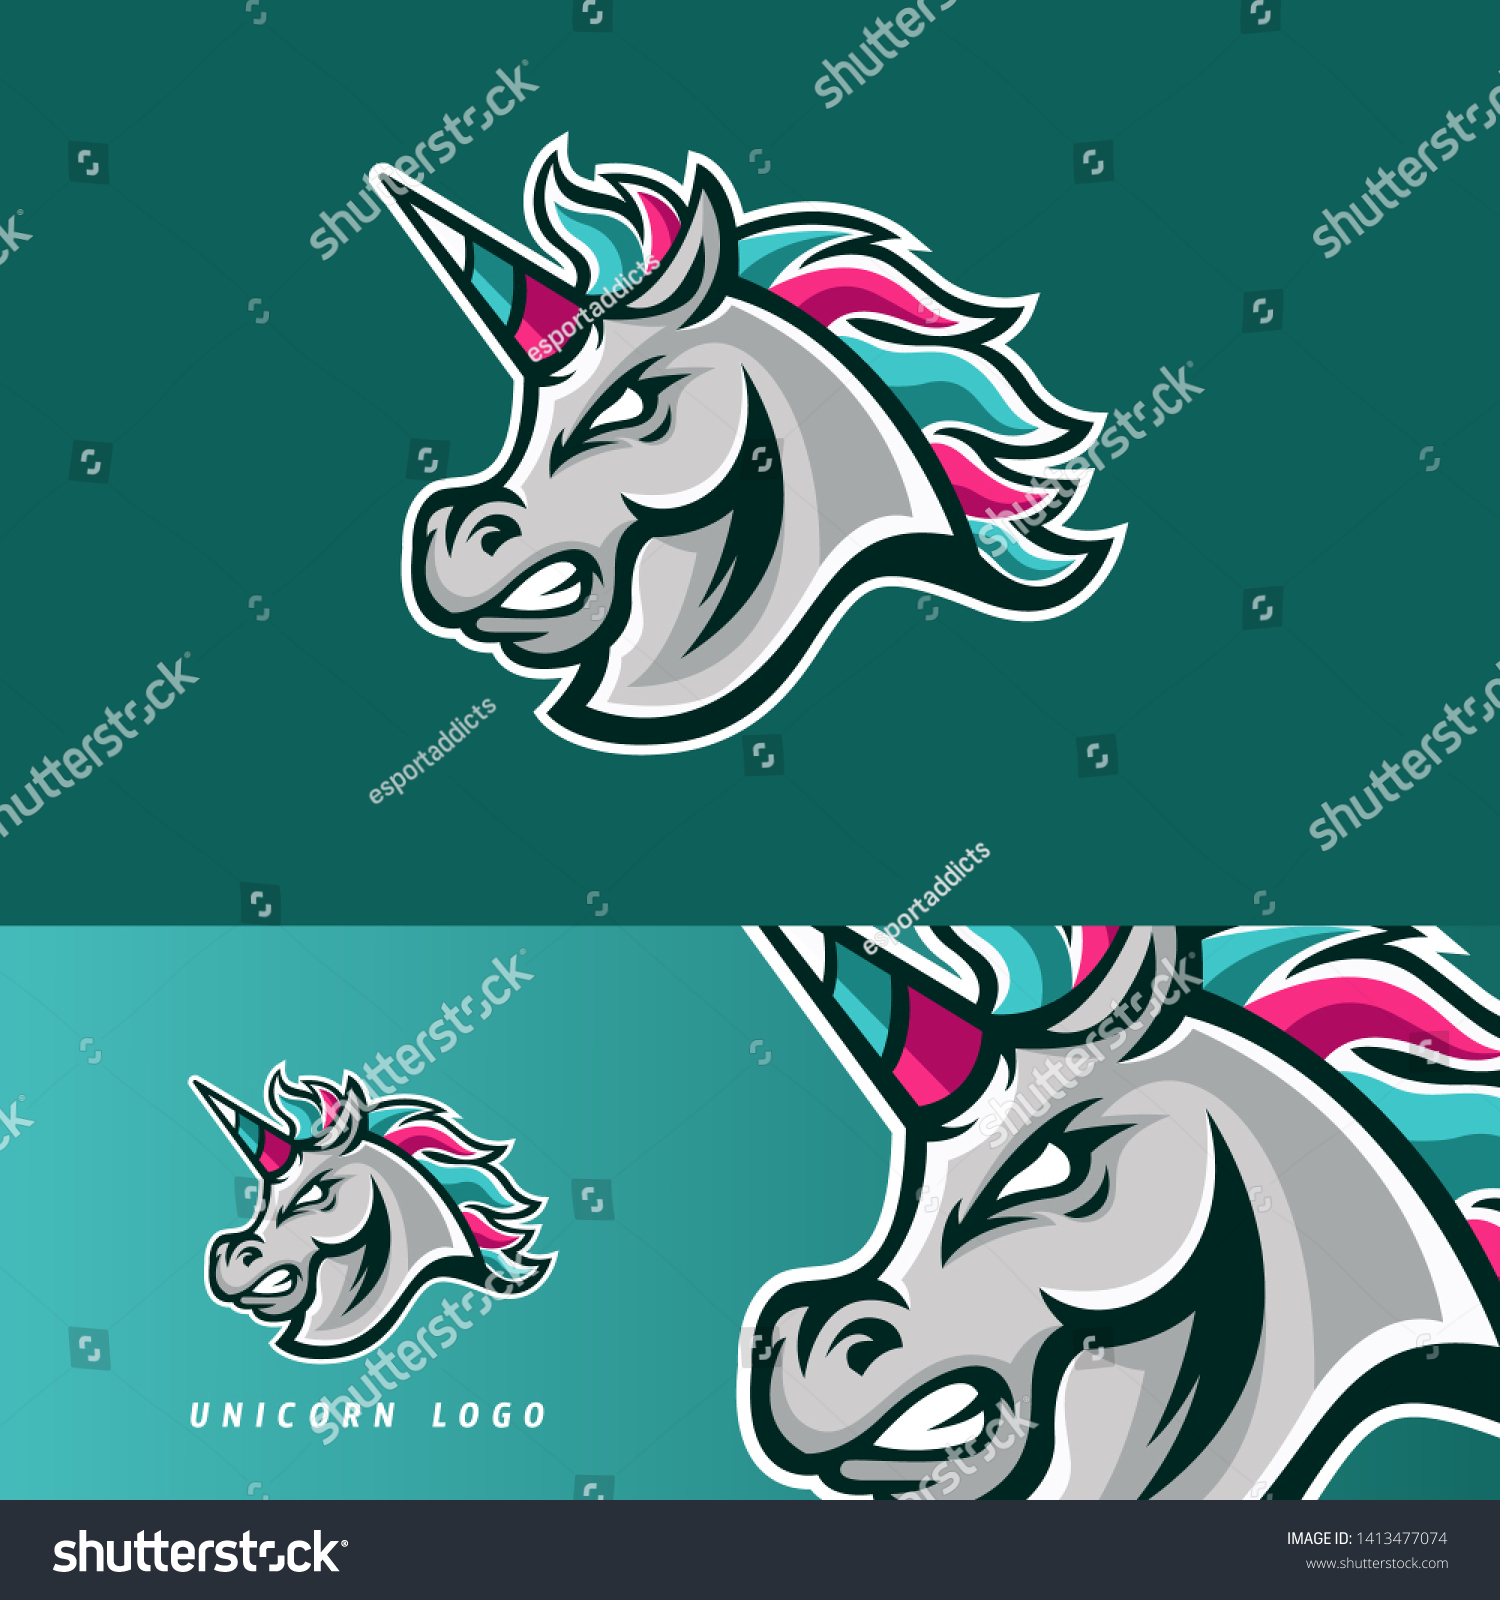 SVG of Unicorn Horse esport gaming mascot logo template, suitable for your team, business, and personal branding svg